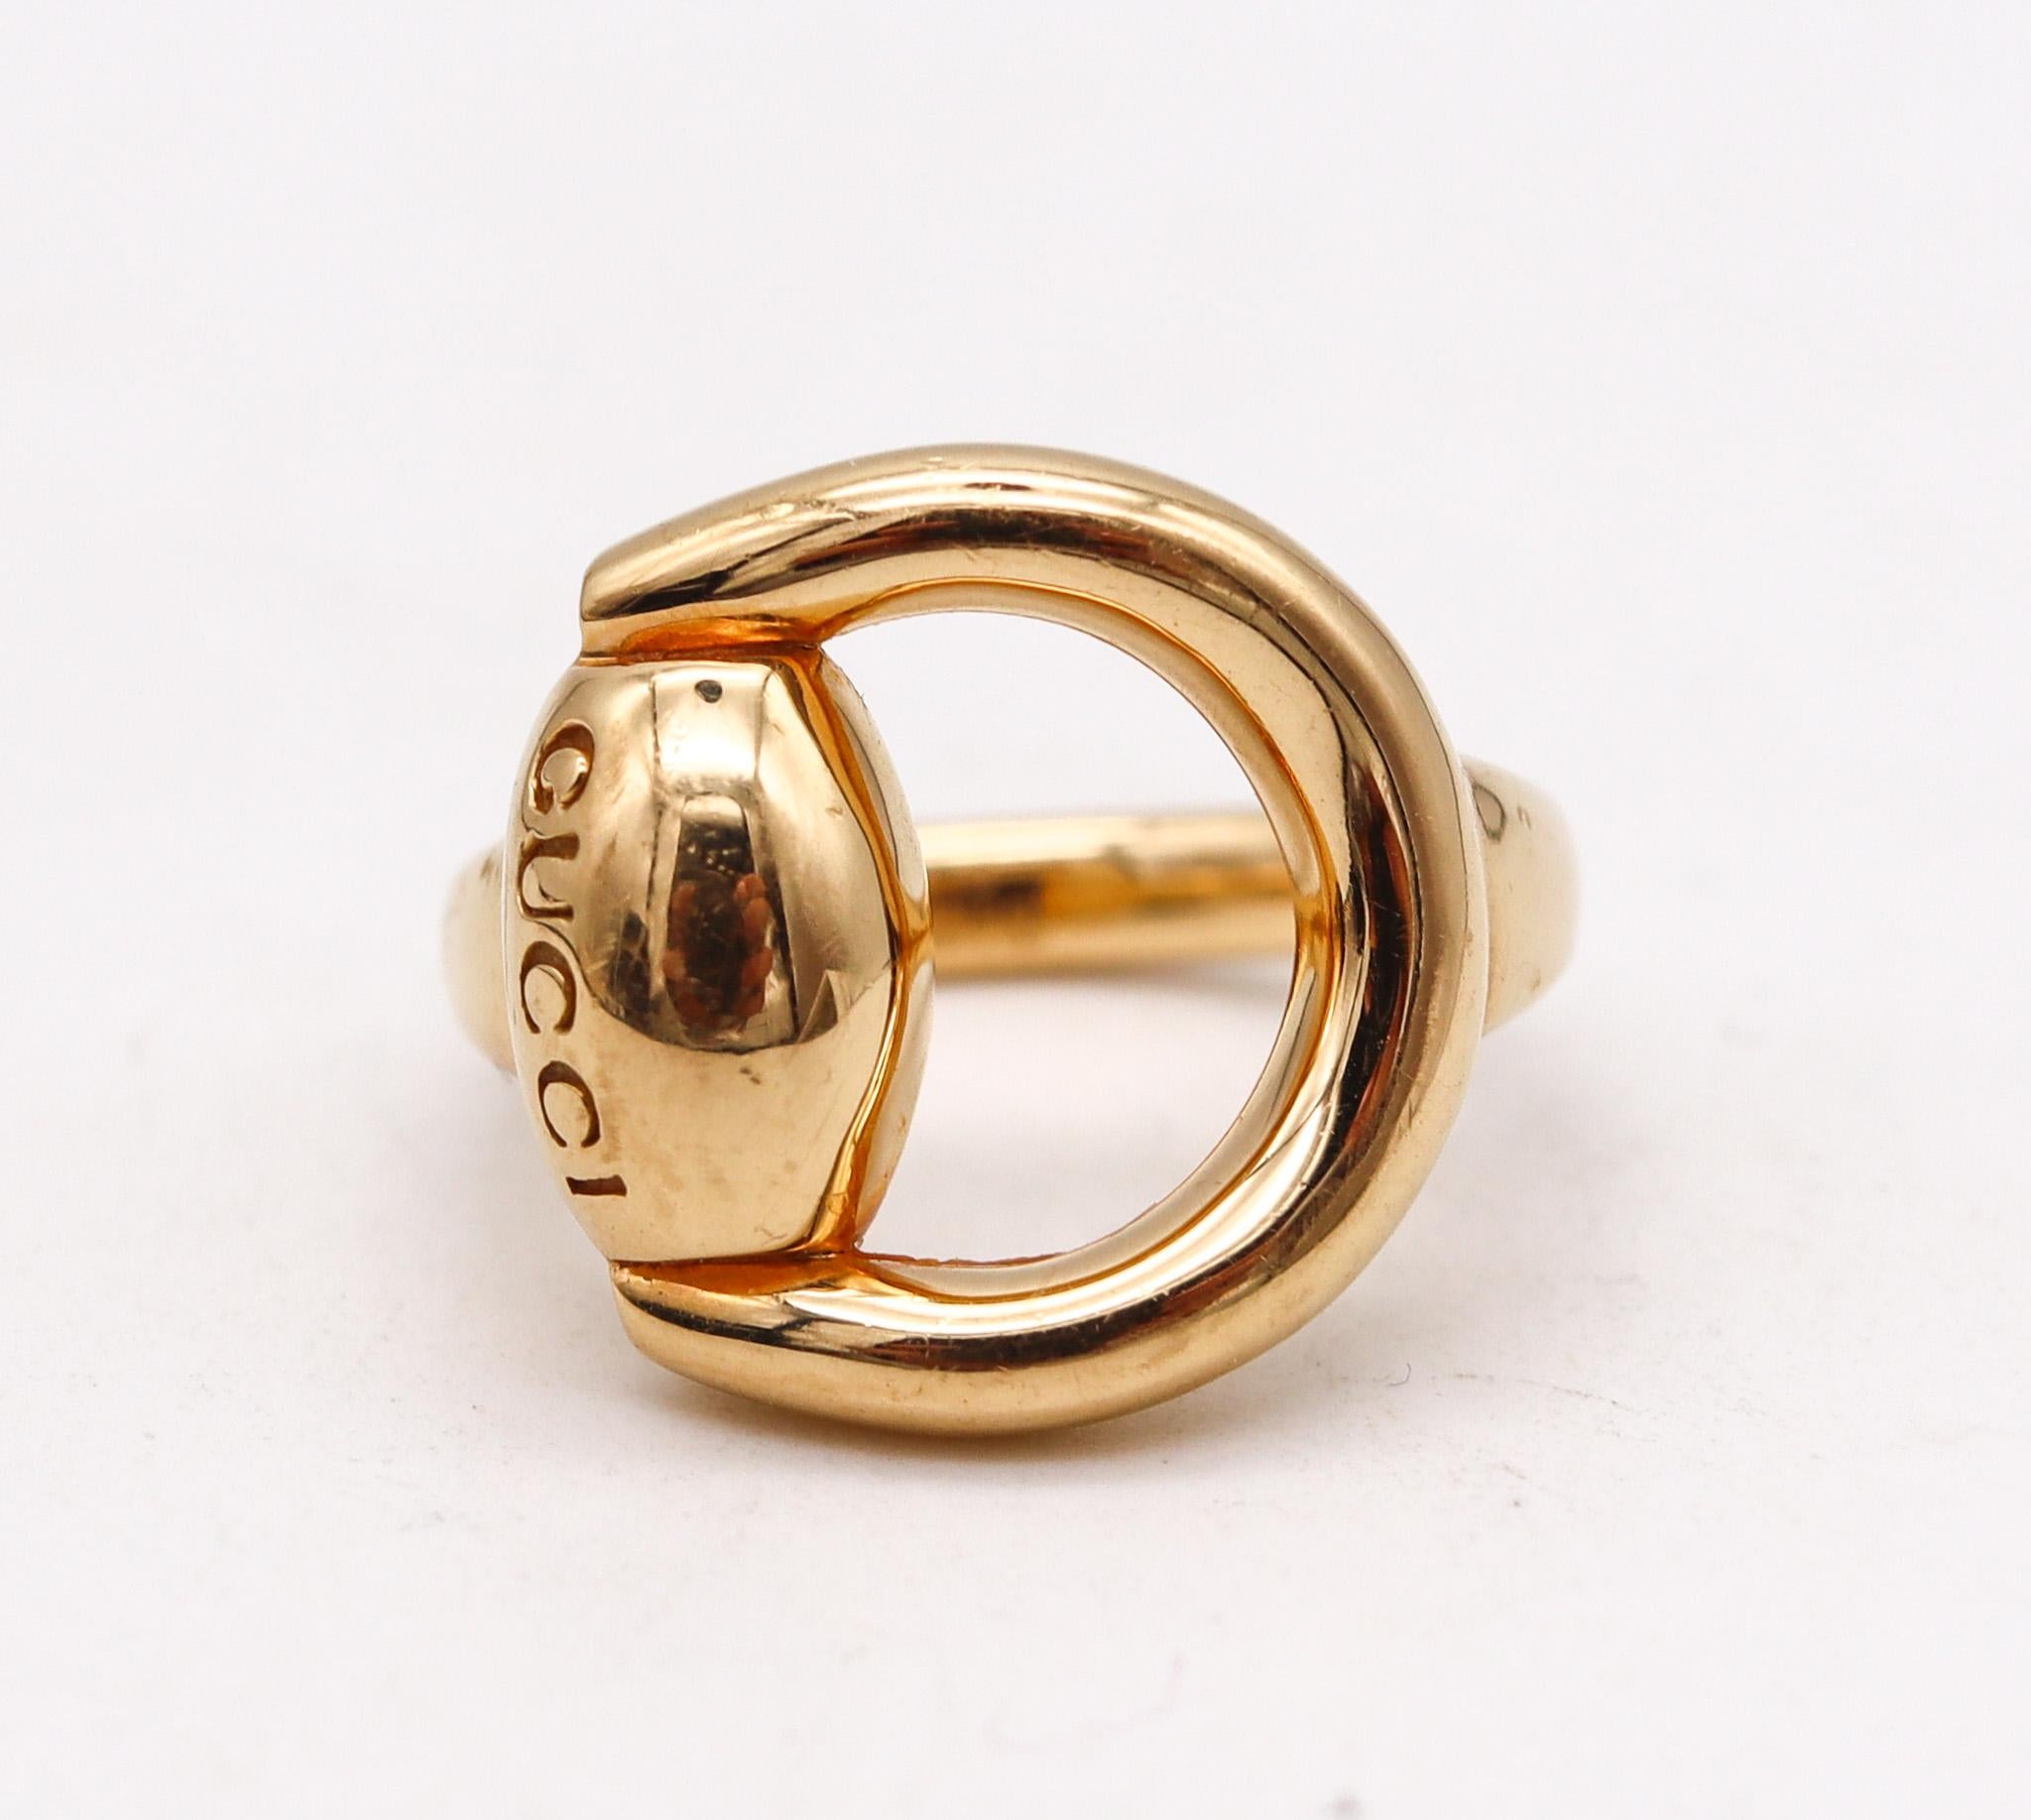 Horsebit ring designed by Gucci.

Beautiful vintage ring, created in milano Italy by the luxury house of Gucci. This cocktail ring has been crafted in the shape of the iconic horsebit design in solid yellow gold of 18 karats with high polished